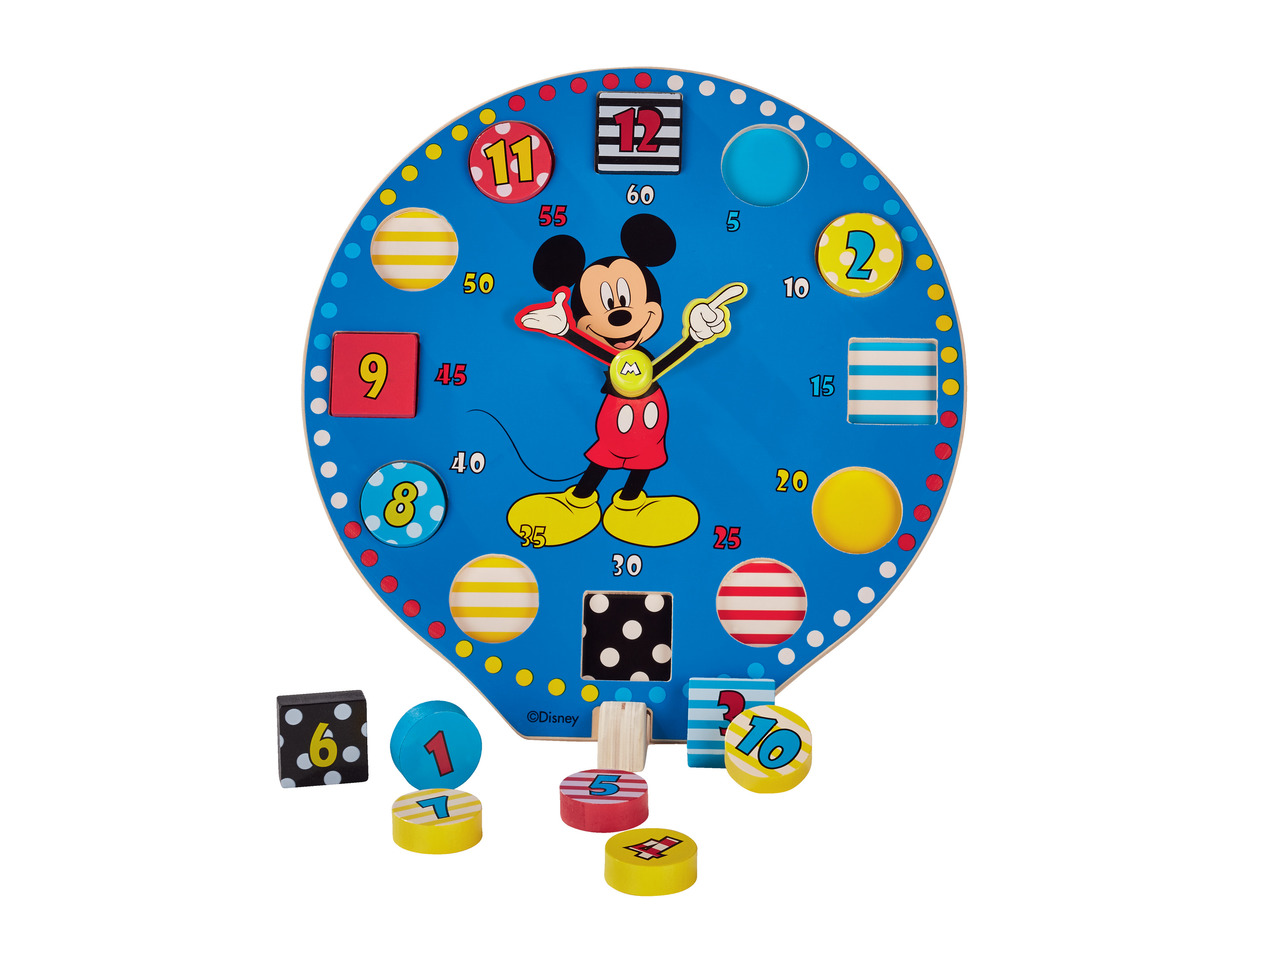 Disney Puzzles and Games